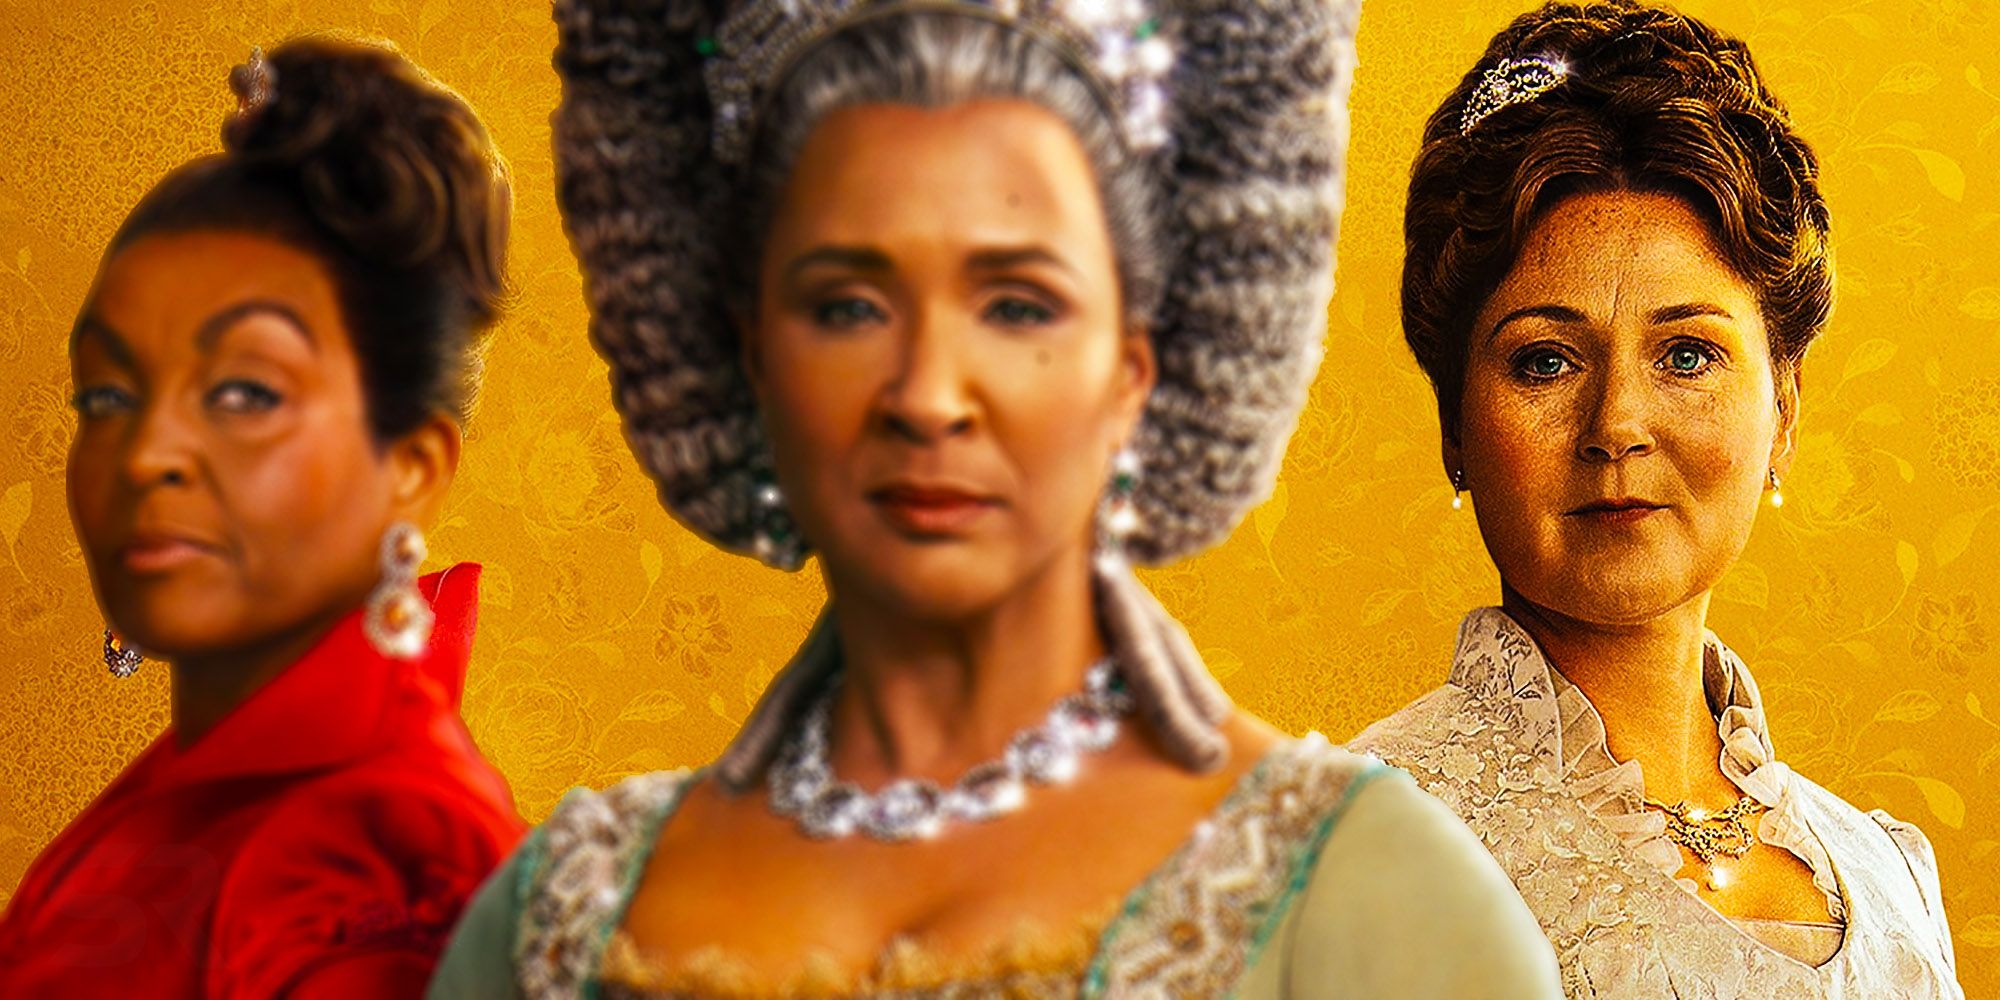 Adjoa Andoh as Lady Danbury, Golda Rosheuvel as Queen Charlotte, and Ruth Gemmell as Dowager Viscountess Bridgerton in Queen Charlotte A Bridgerton Story